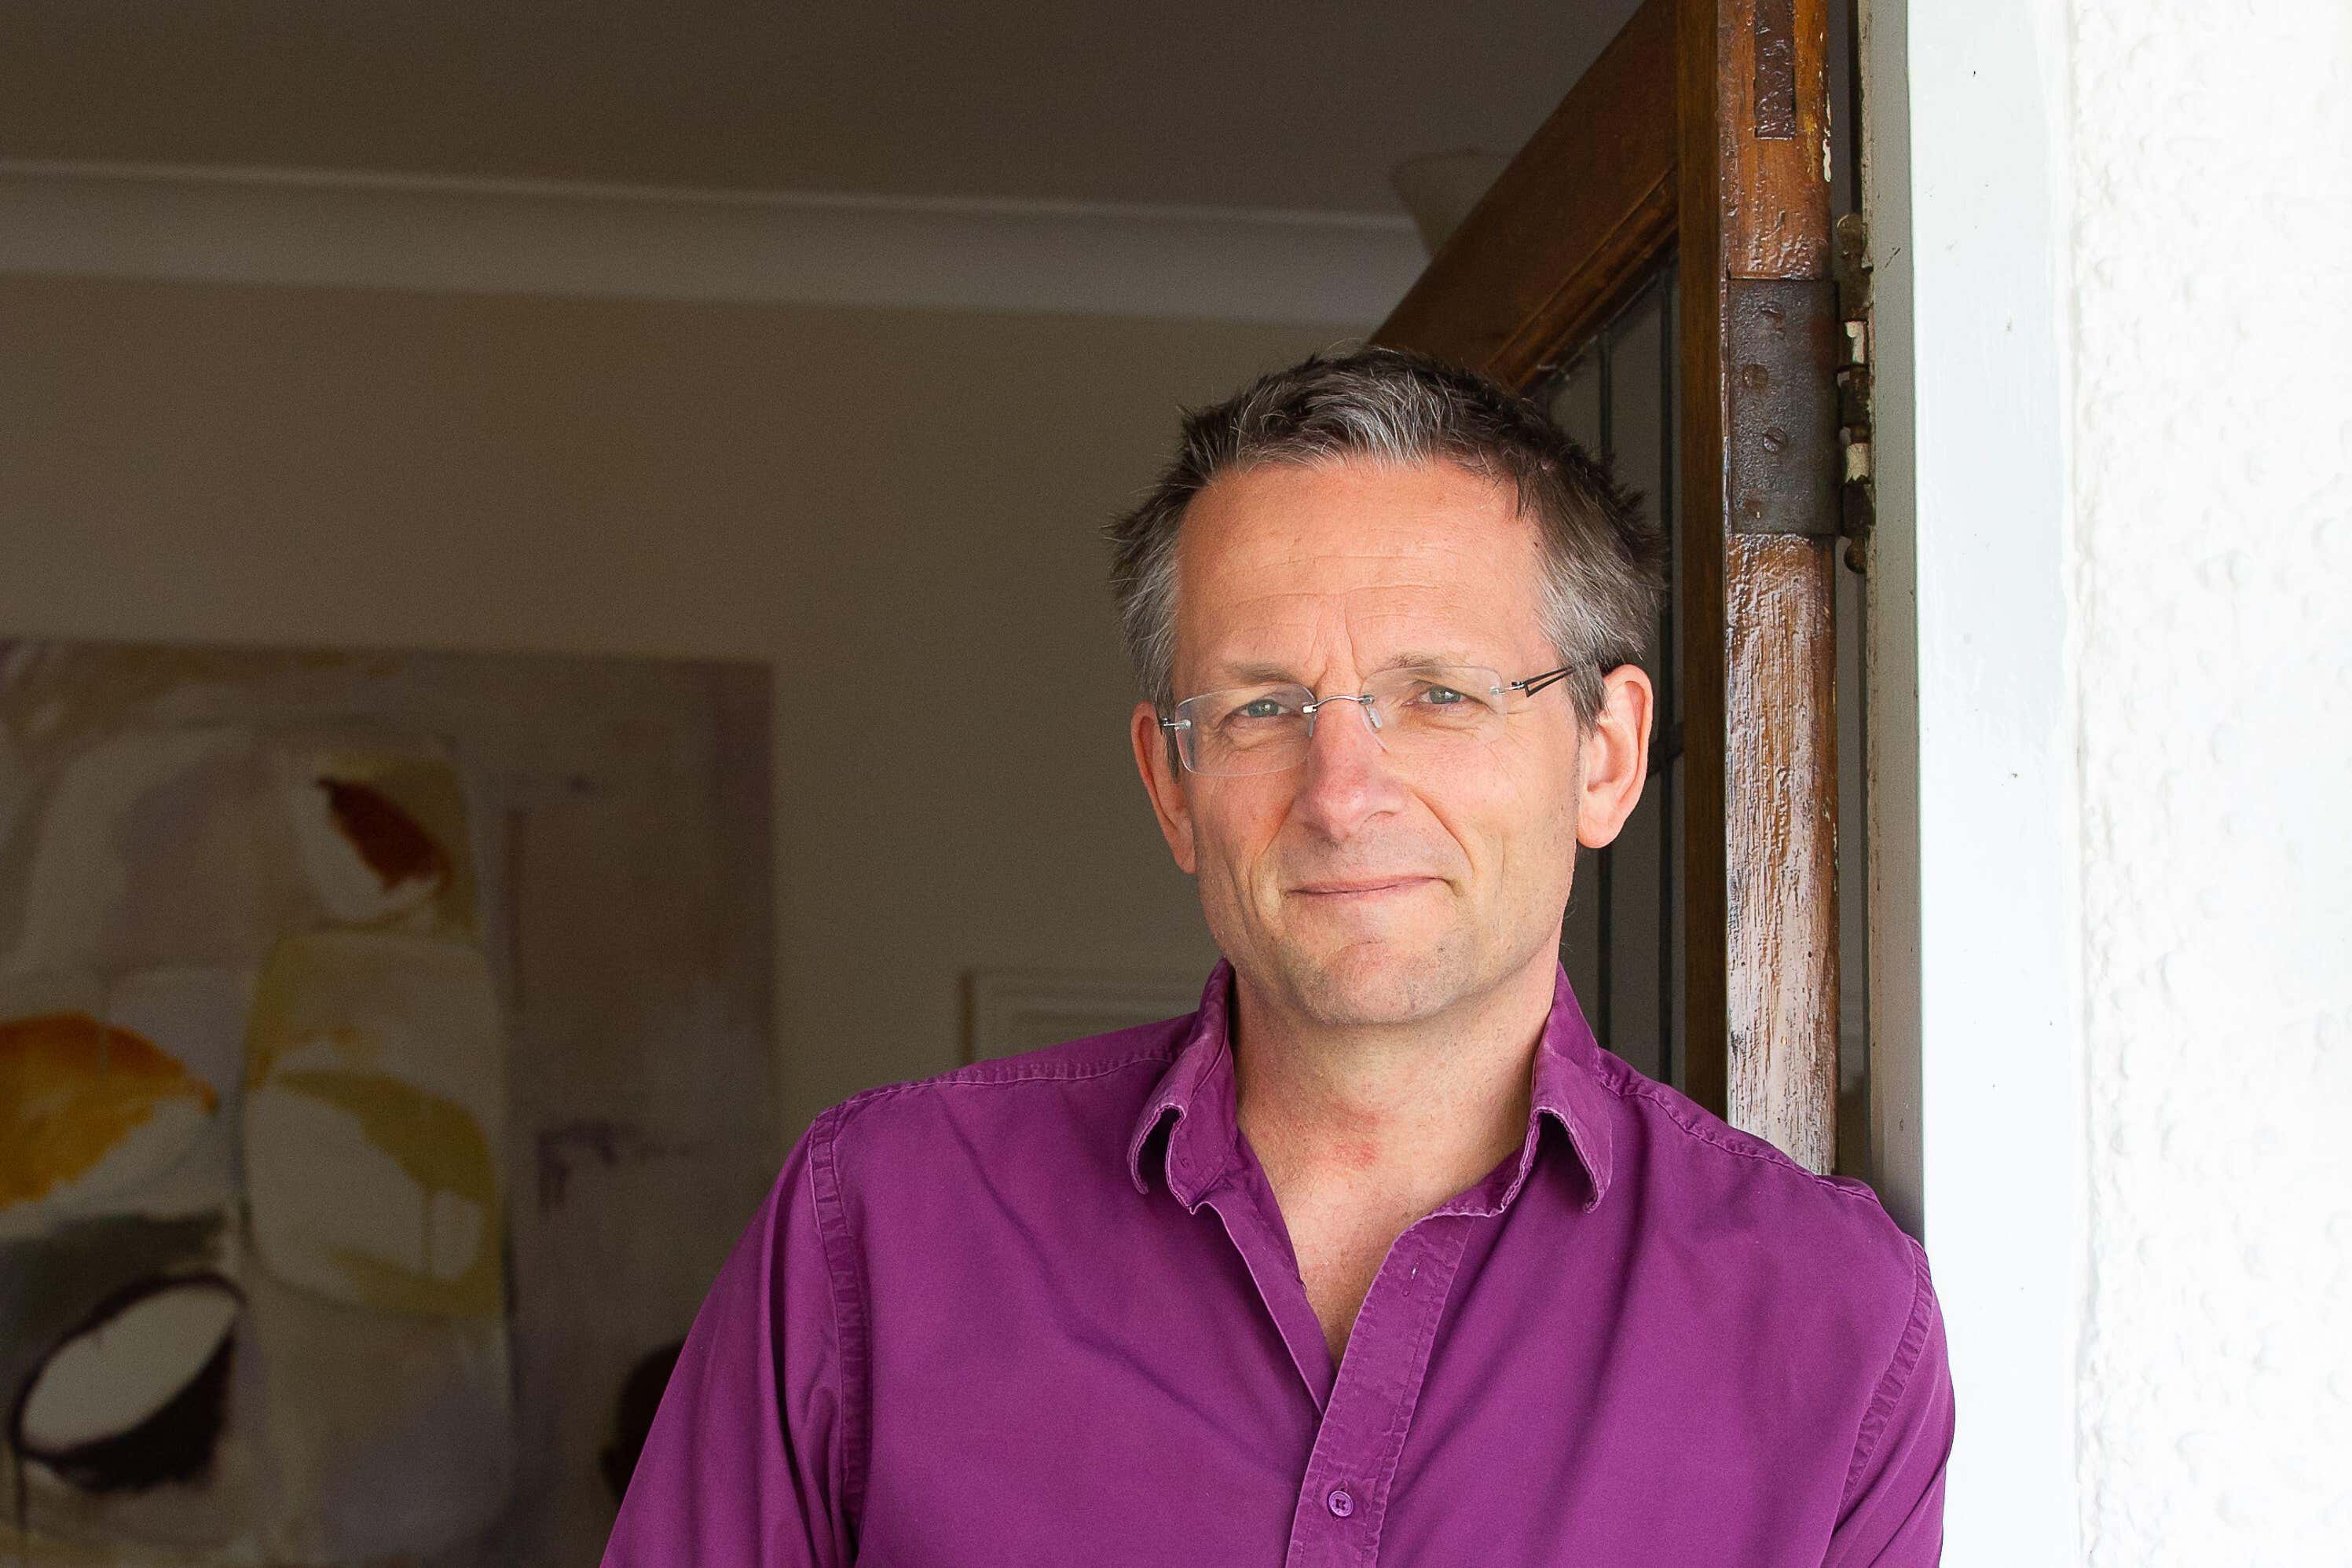 Michael Mosley’s contribution to science and health is ‘unparalleled’